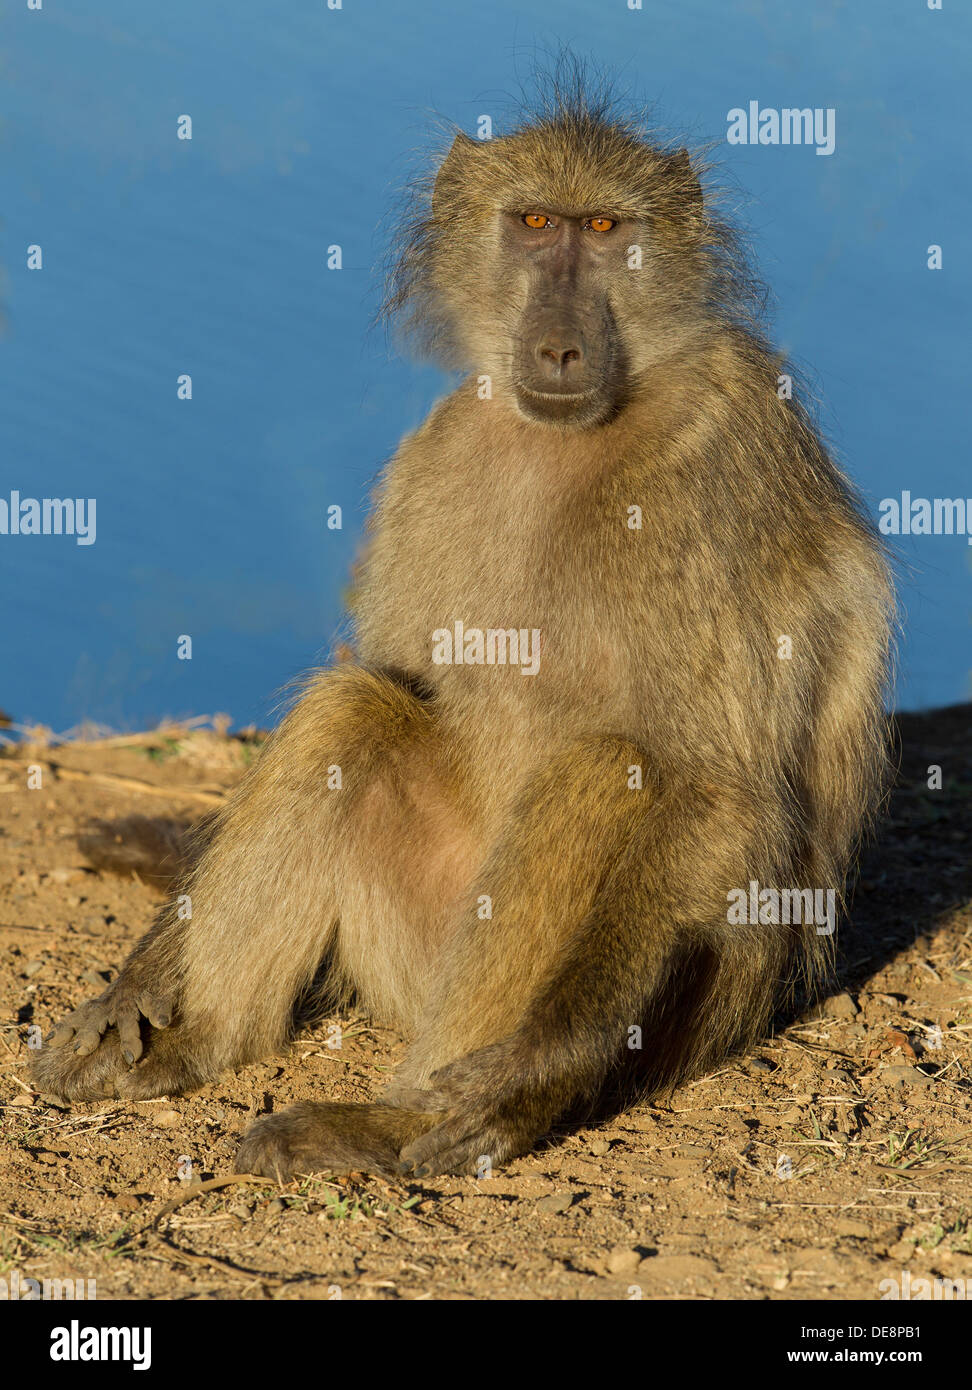 Chacma Baboon, Kruger Park, South Africa. Stock Photo